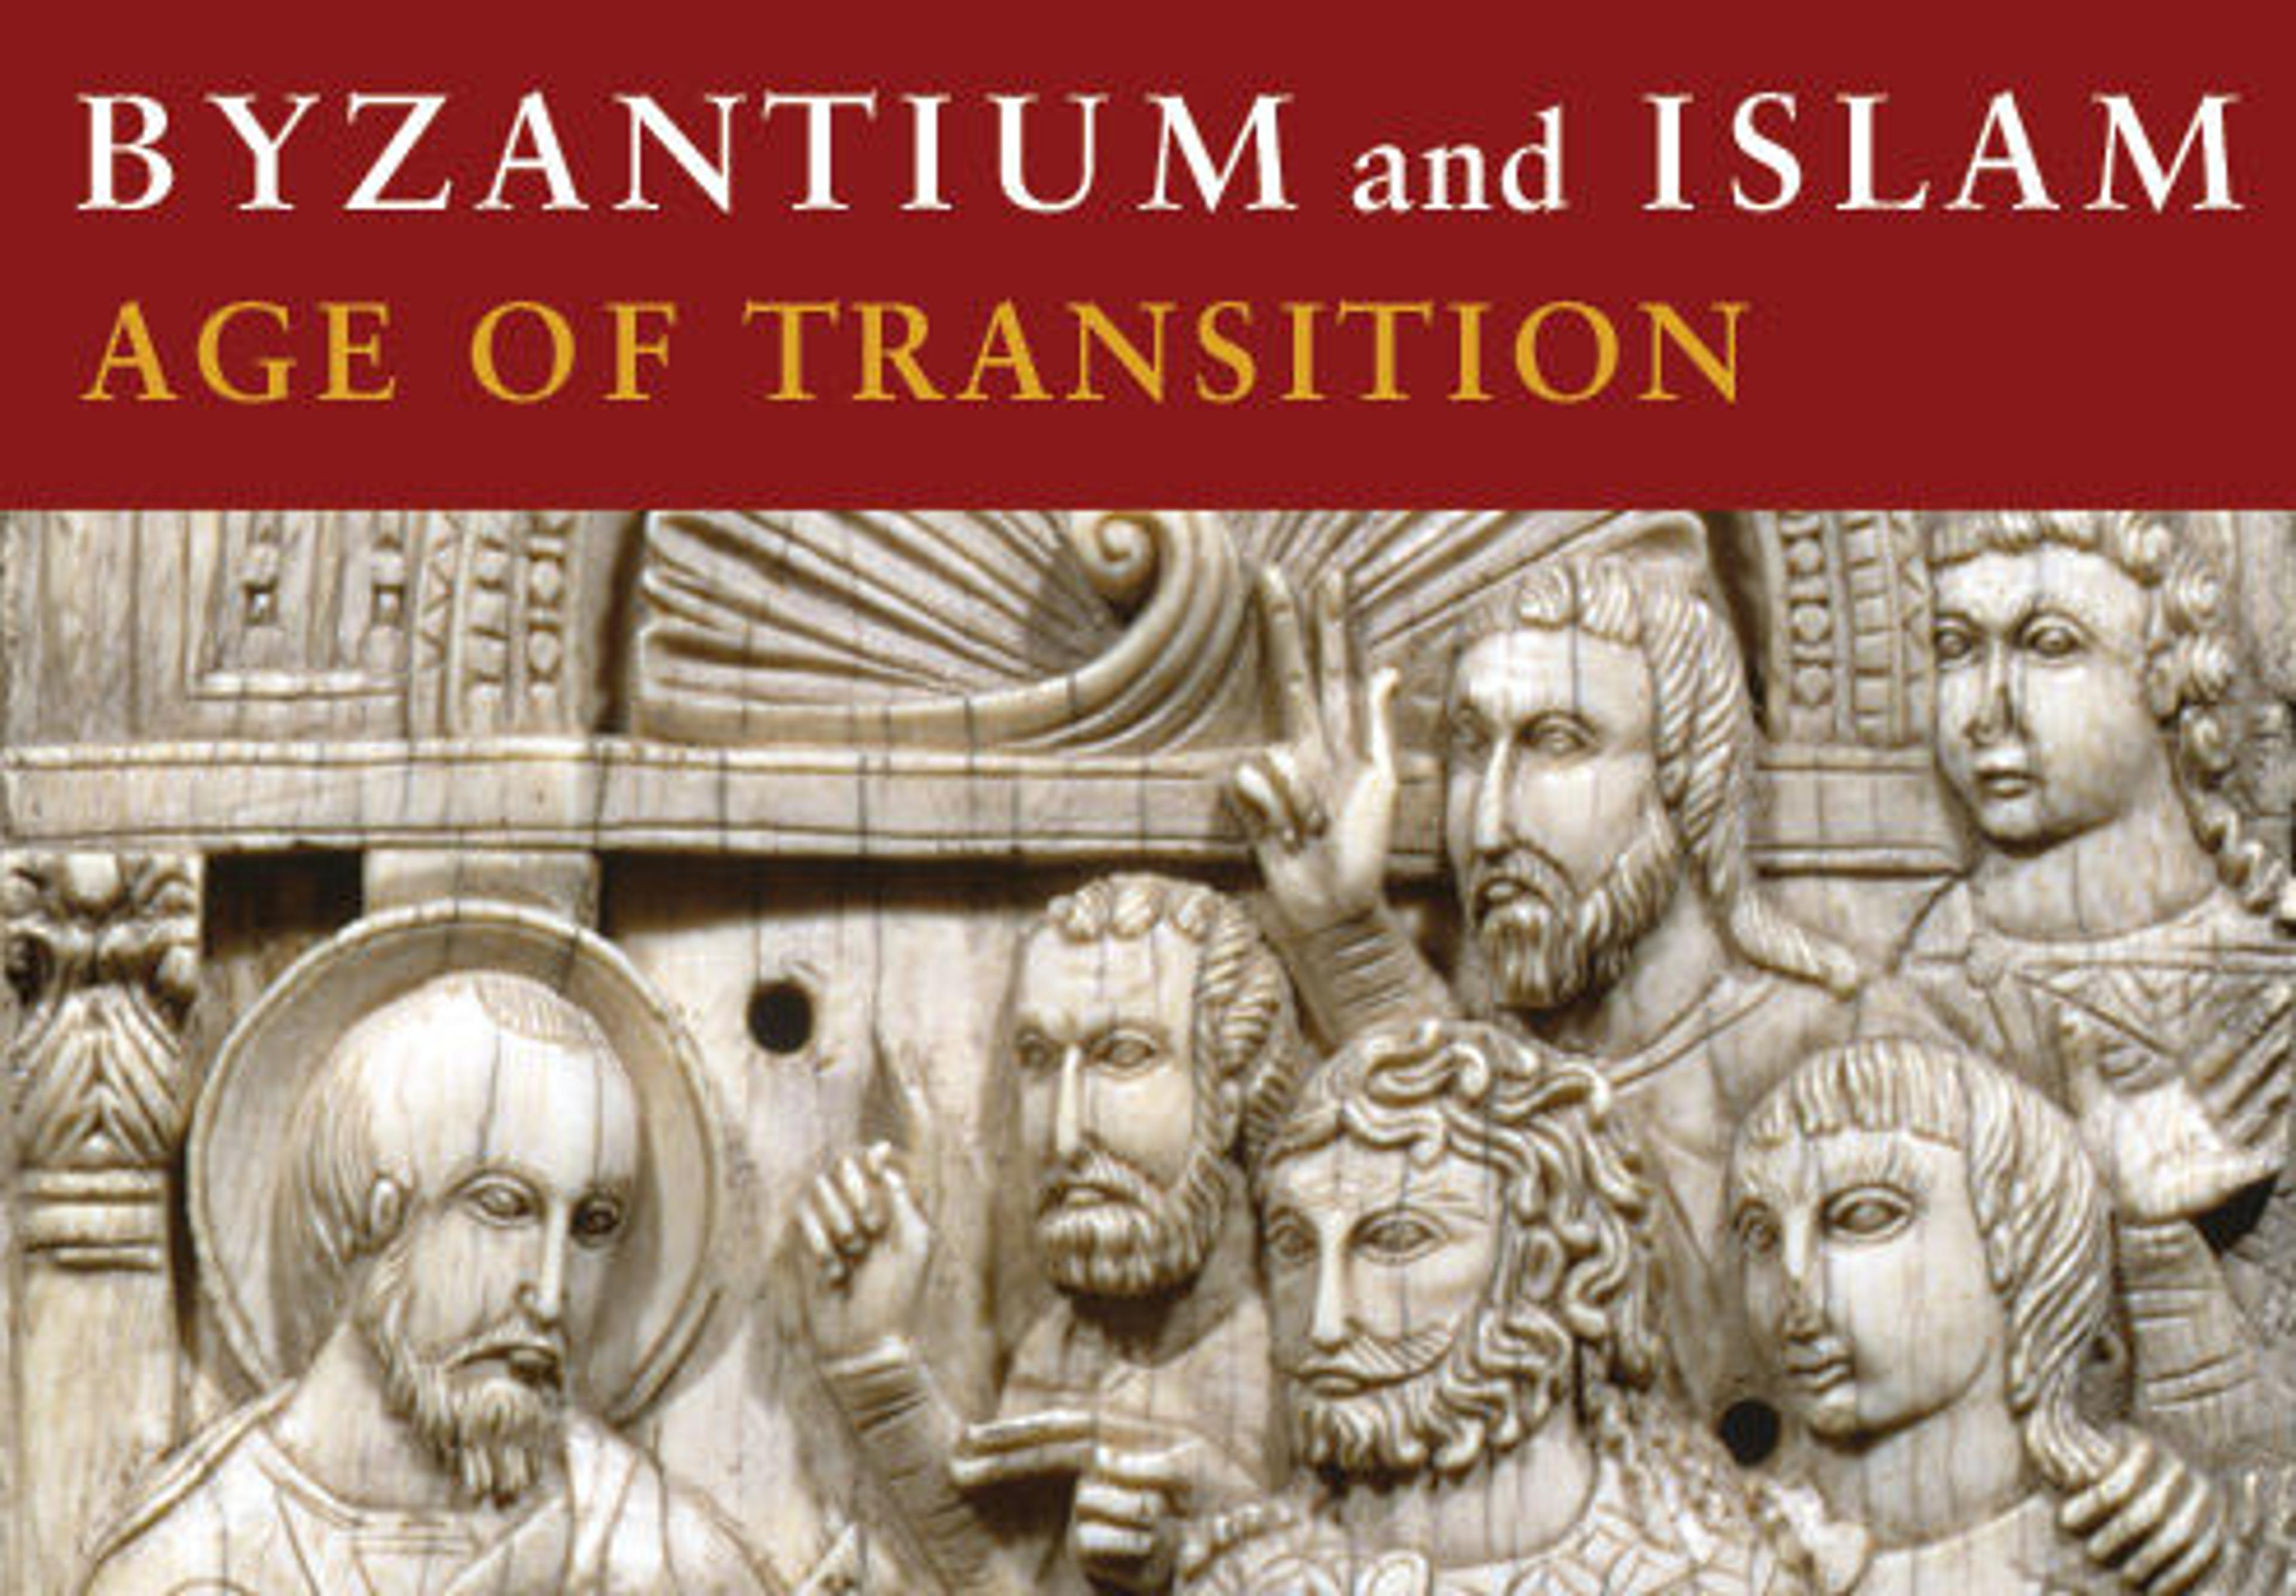 Byzantium and Islam: Age of Transition, Accompanied by a <a href="http://www.metmuseum.org/exhibitions/listings/2012/byzantium-and-islam/blog">blog</a>